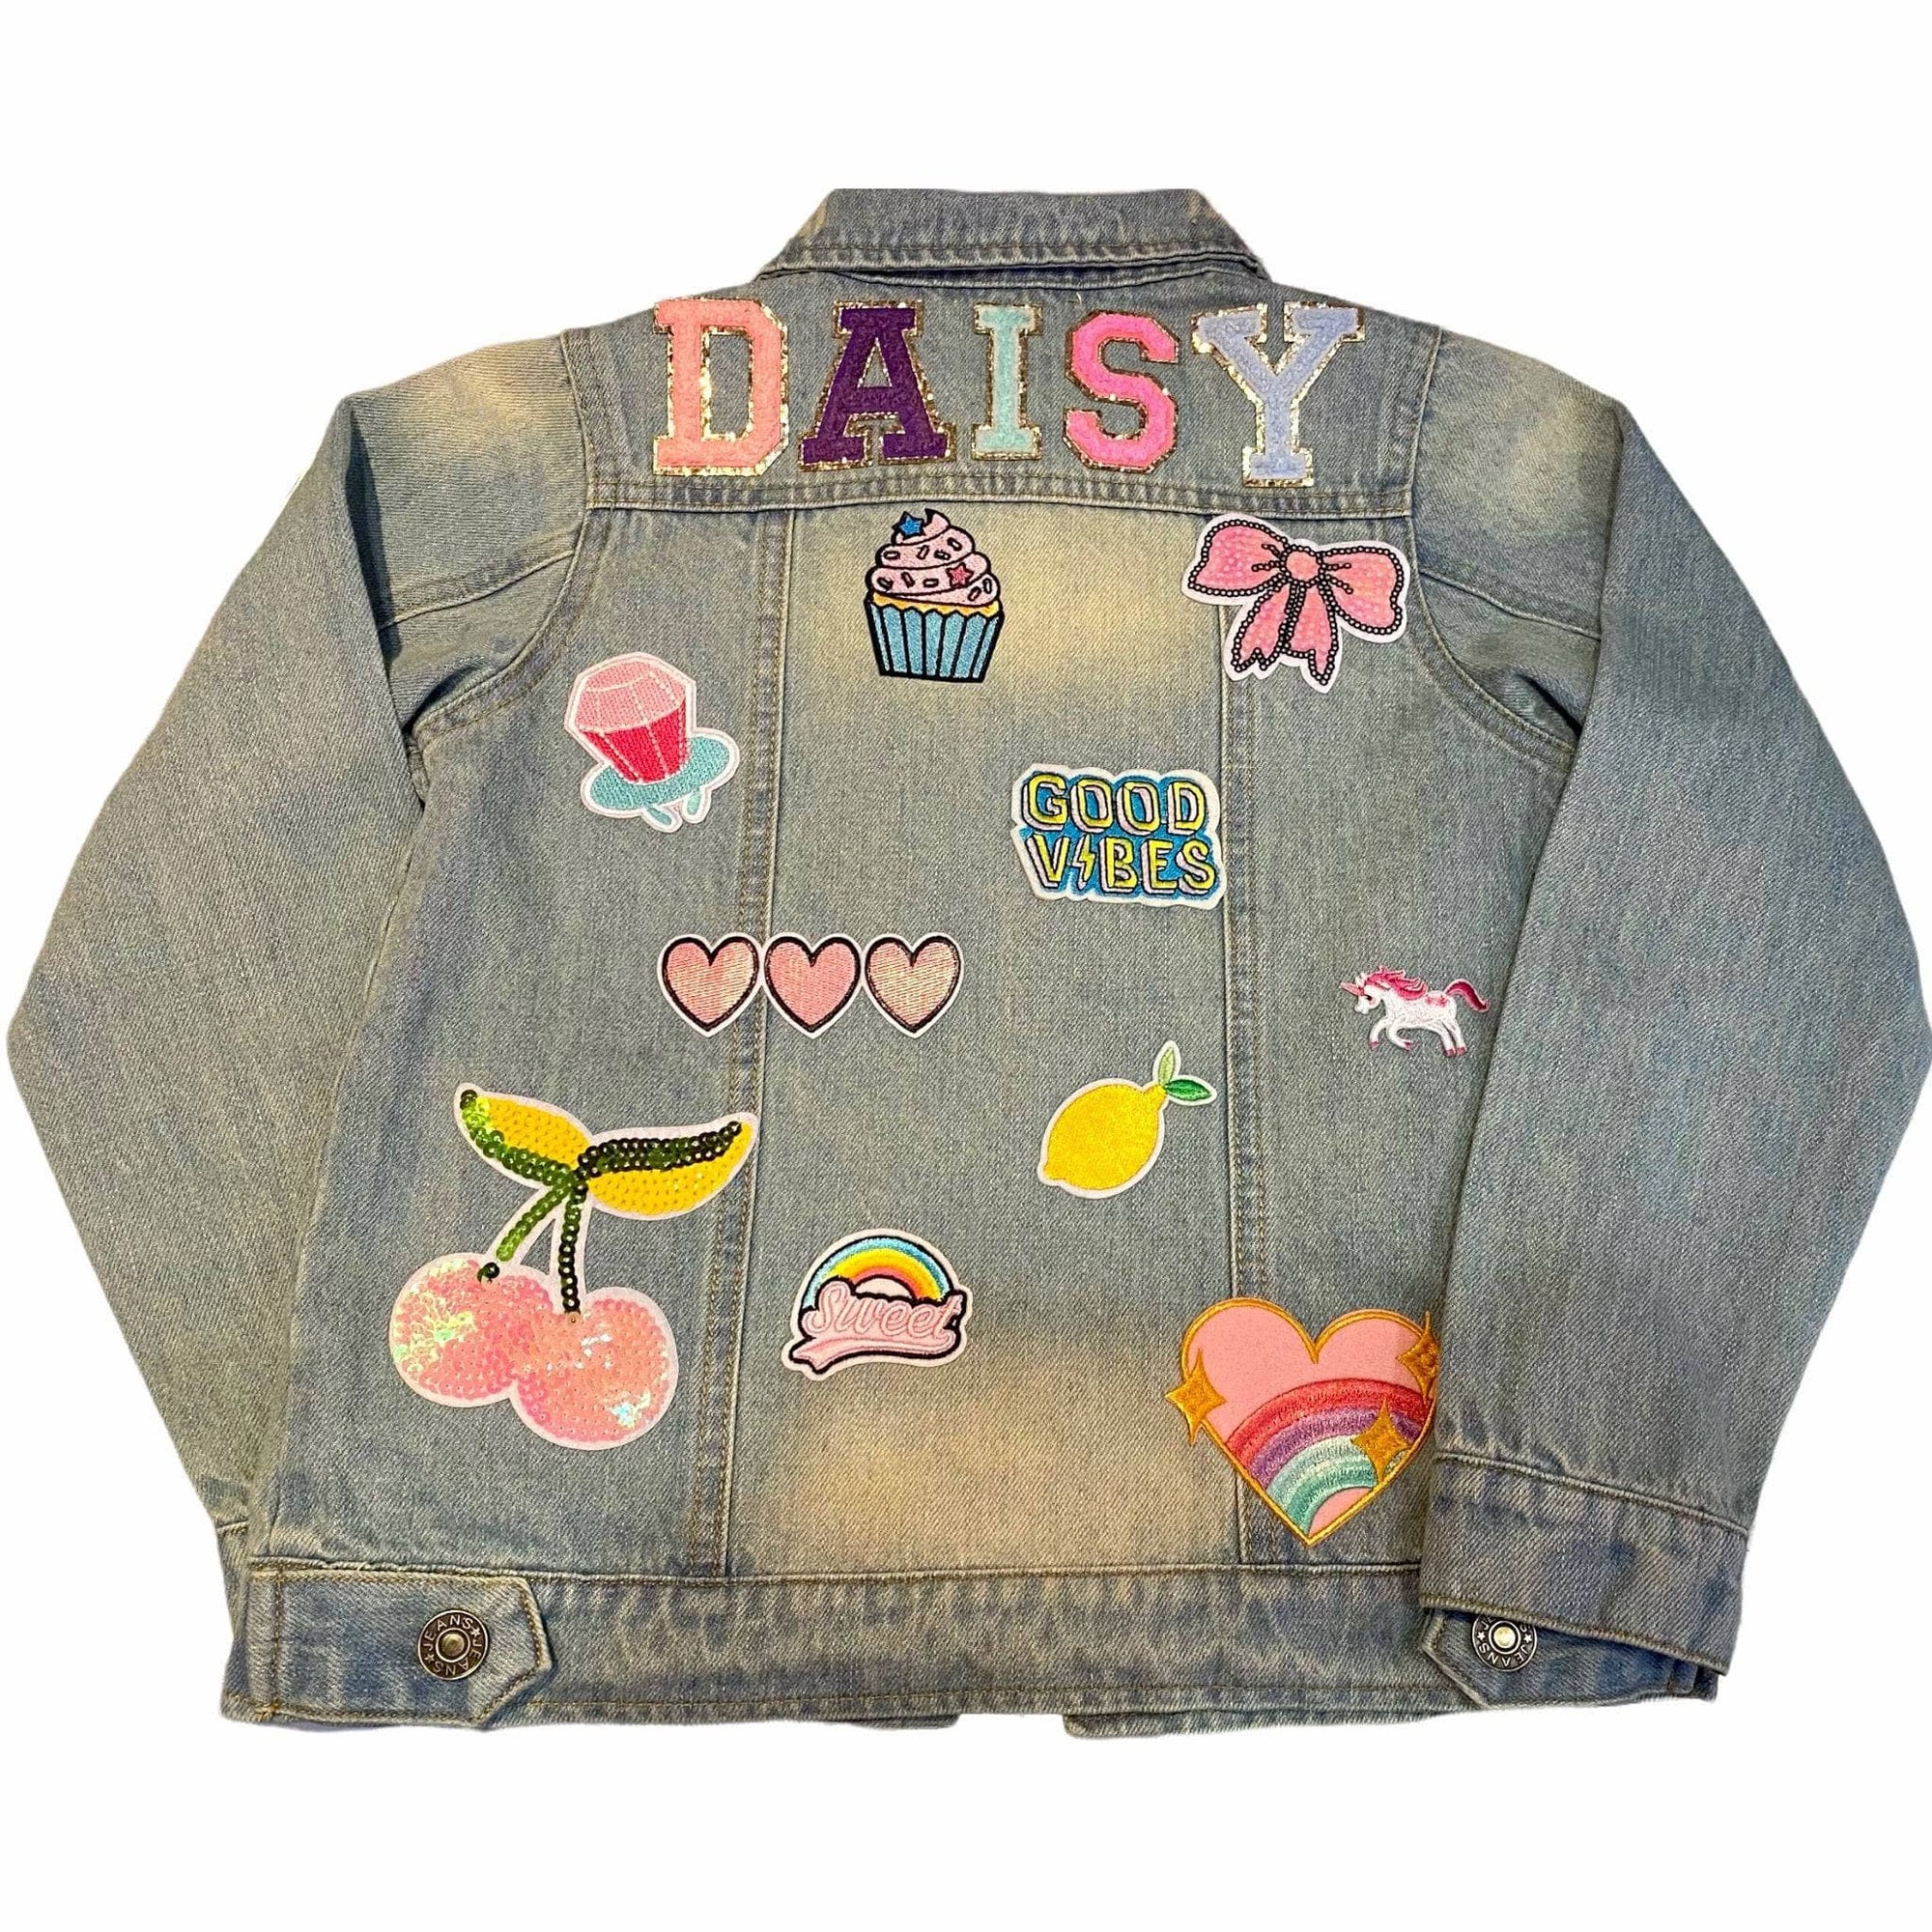 Enhance Your Style with Emoji Patches for Clothes